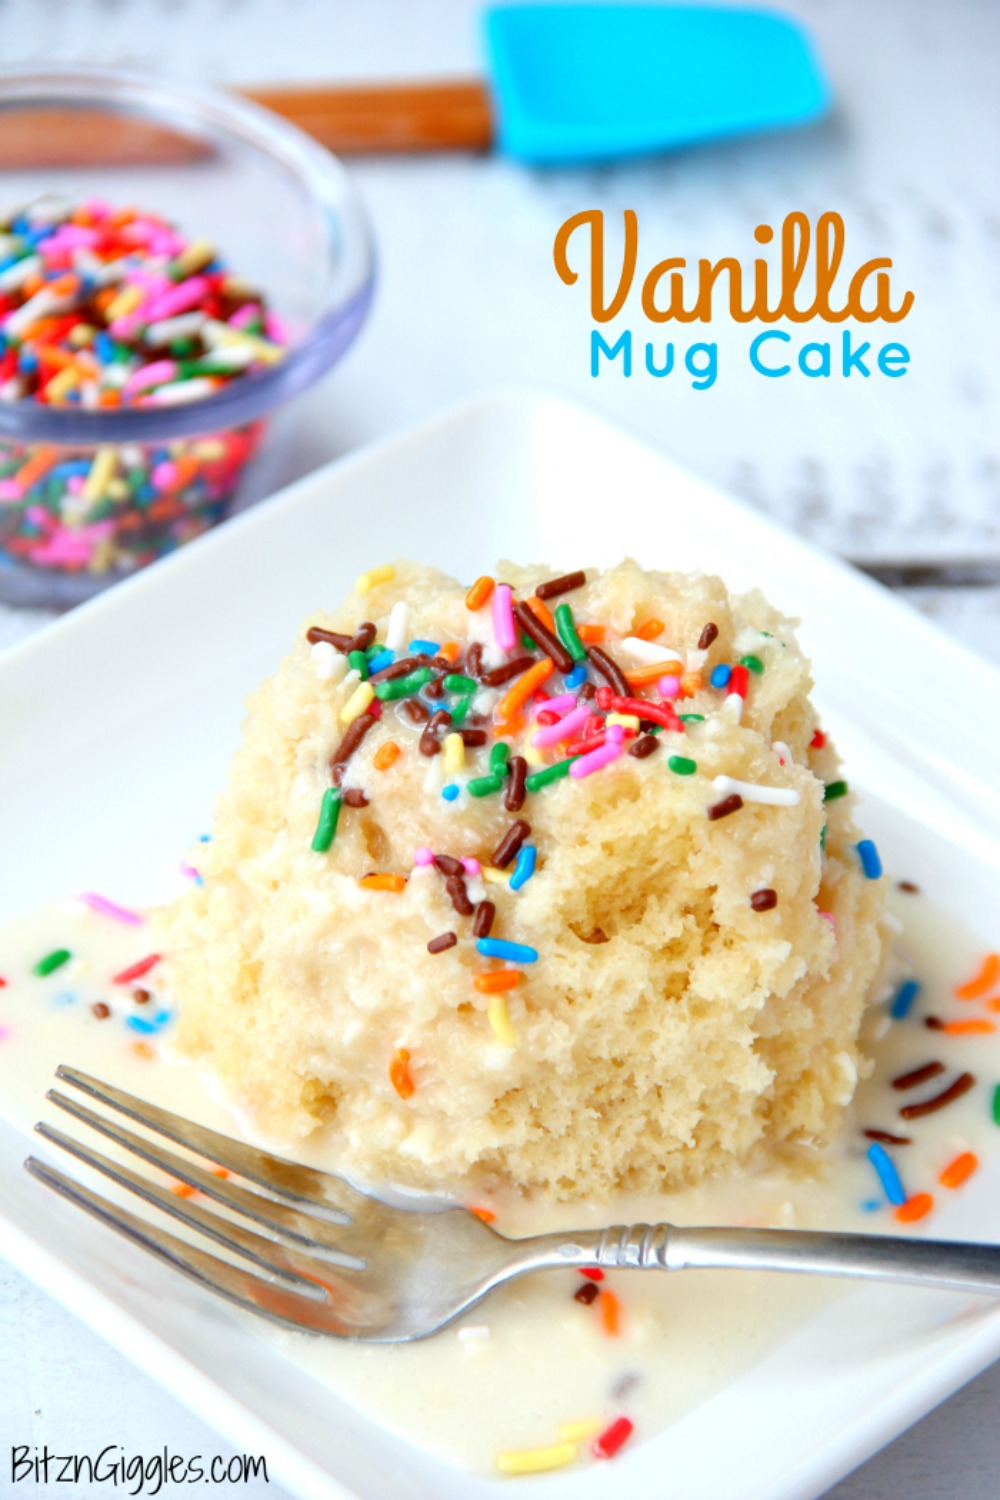 Easy Vanilla Mug Cake – Ready in 90 seconds! This mug cake is moist, delicious and topped with a lovely vanilla icing that soaks into the cake and infuses it with sweetness!